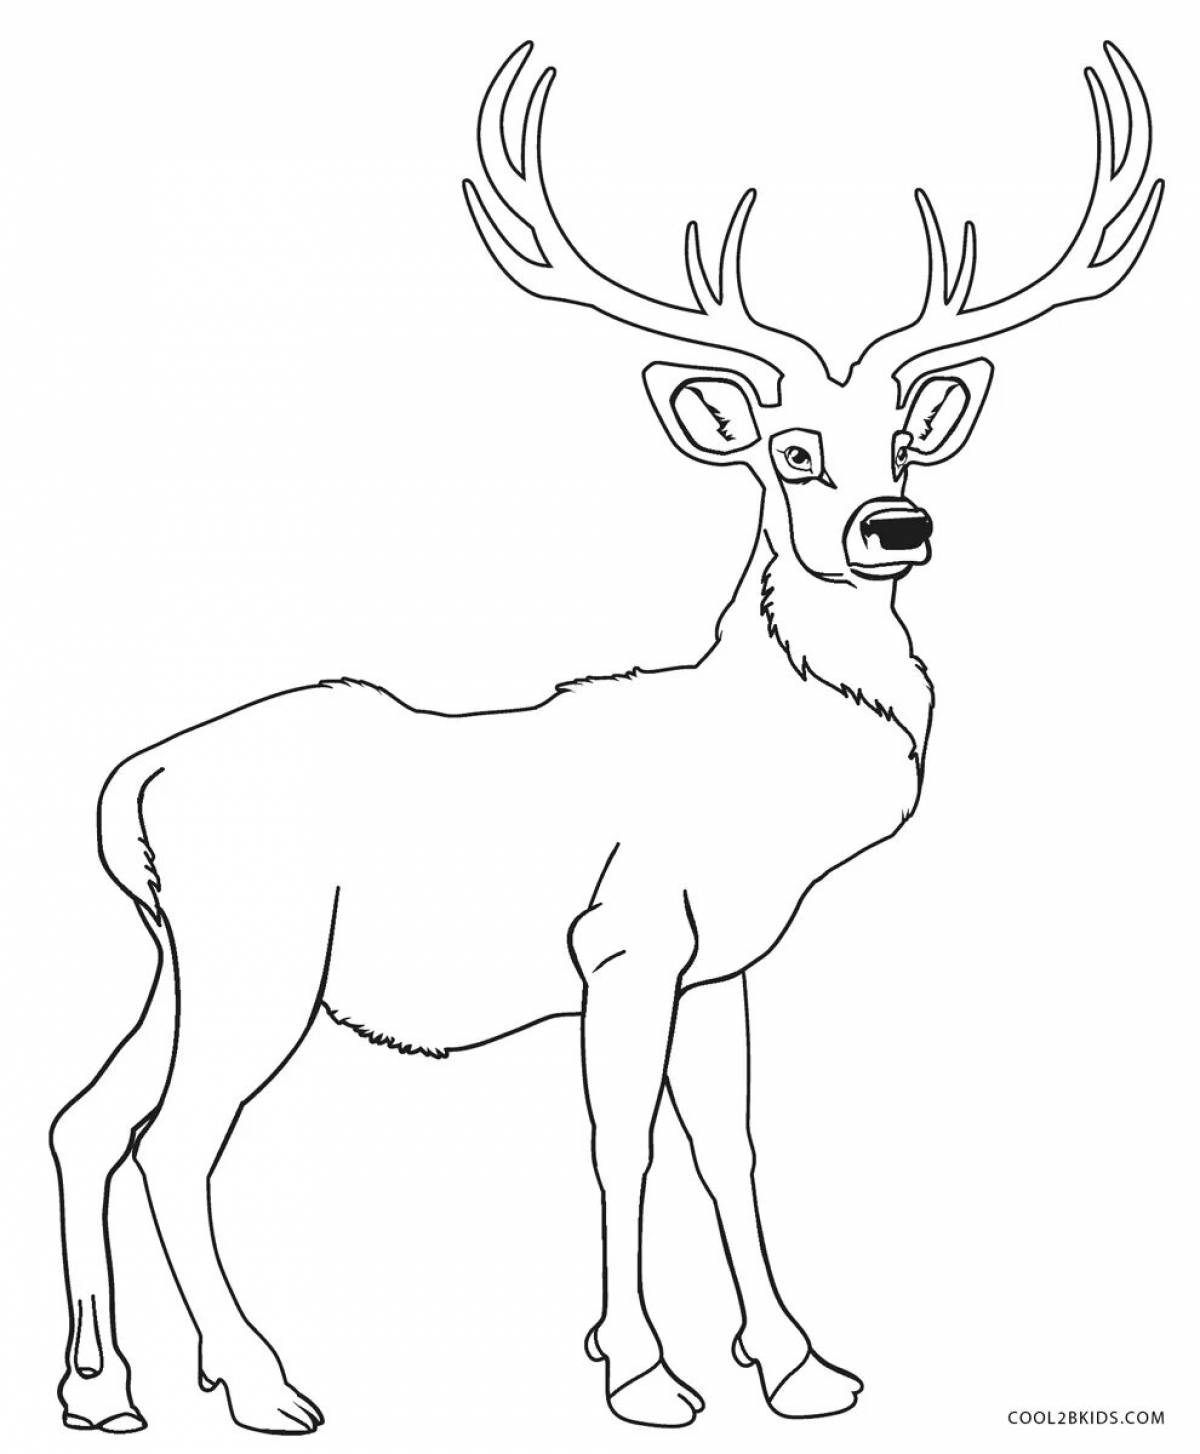 Playful deer coloring book for children 6-7 years old